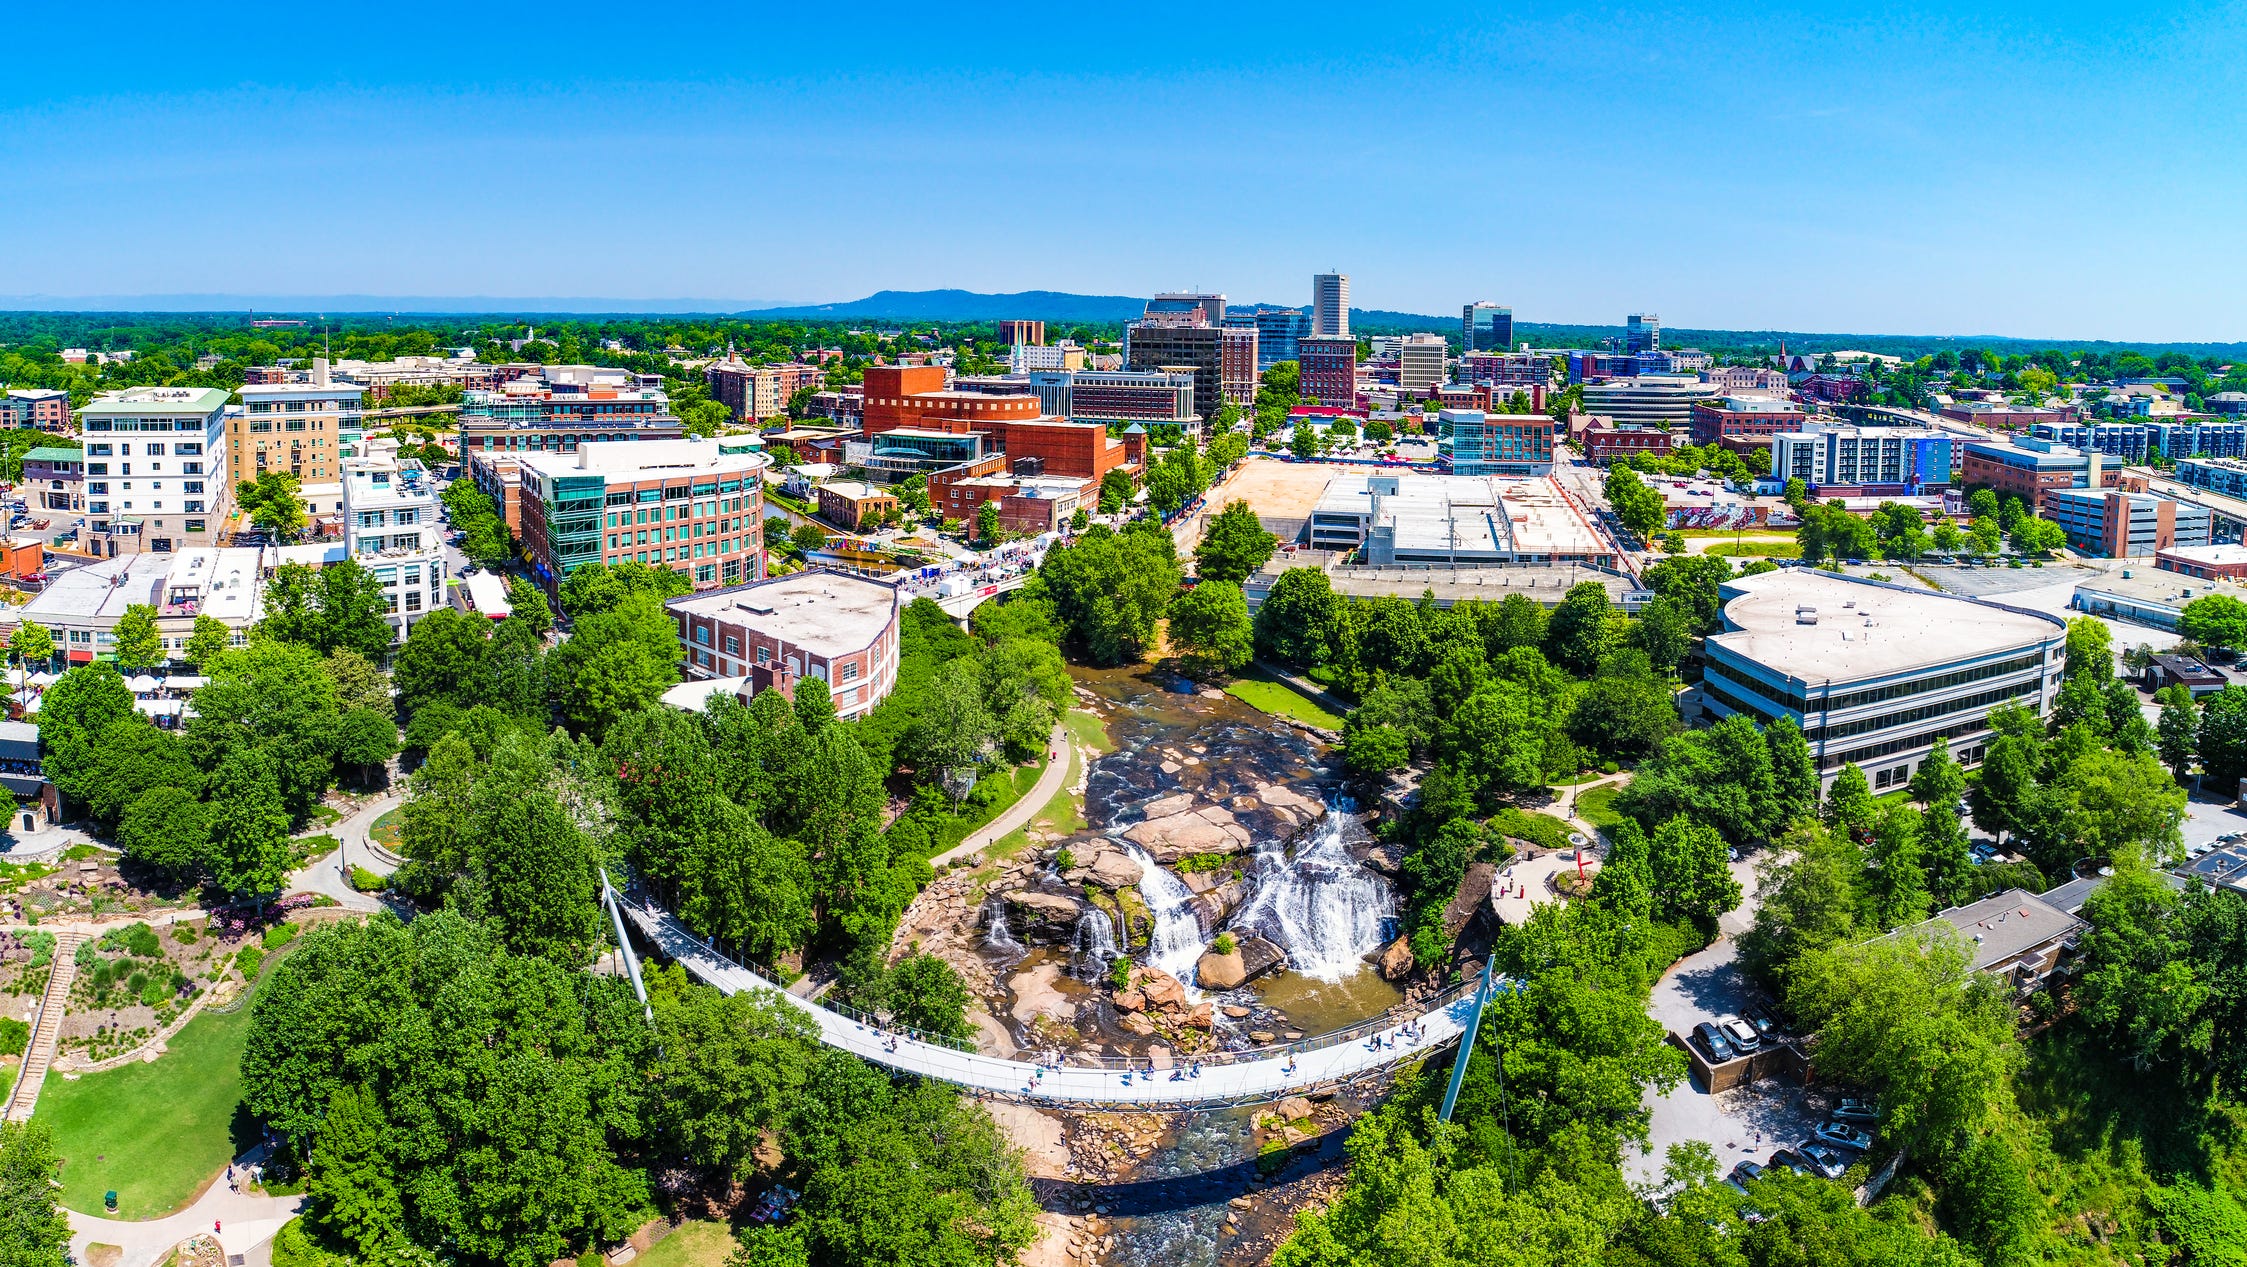  Greenville tops SC desirability list: Here's why people are moving to the Upstate 